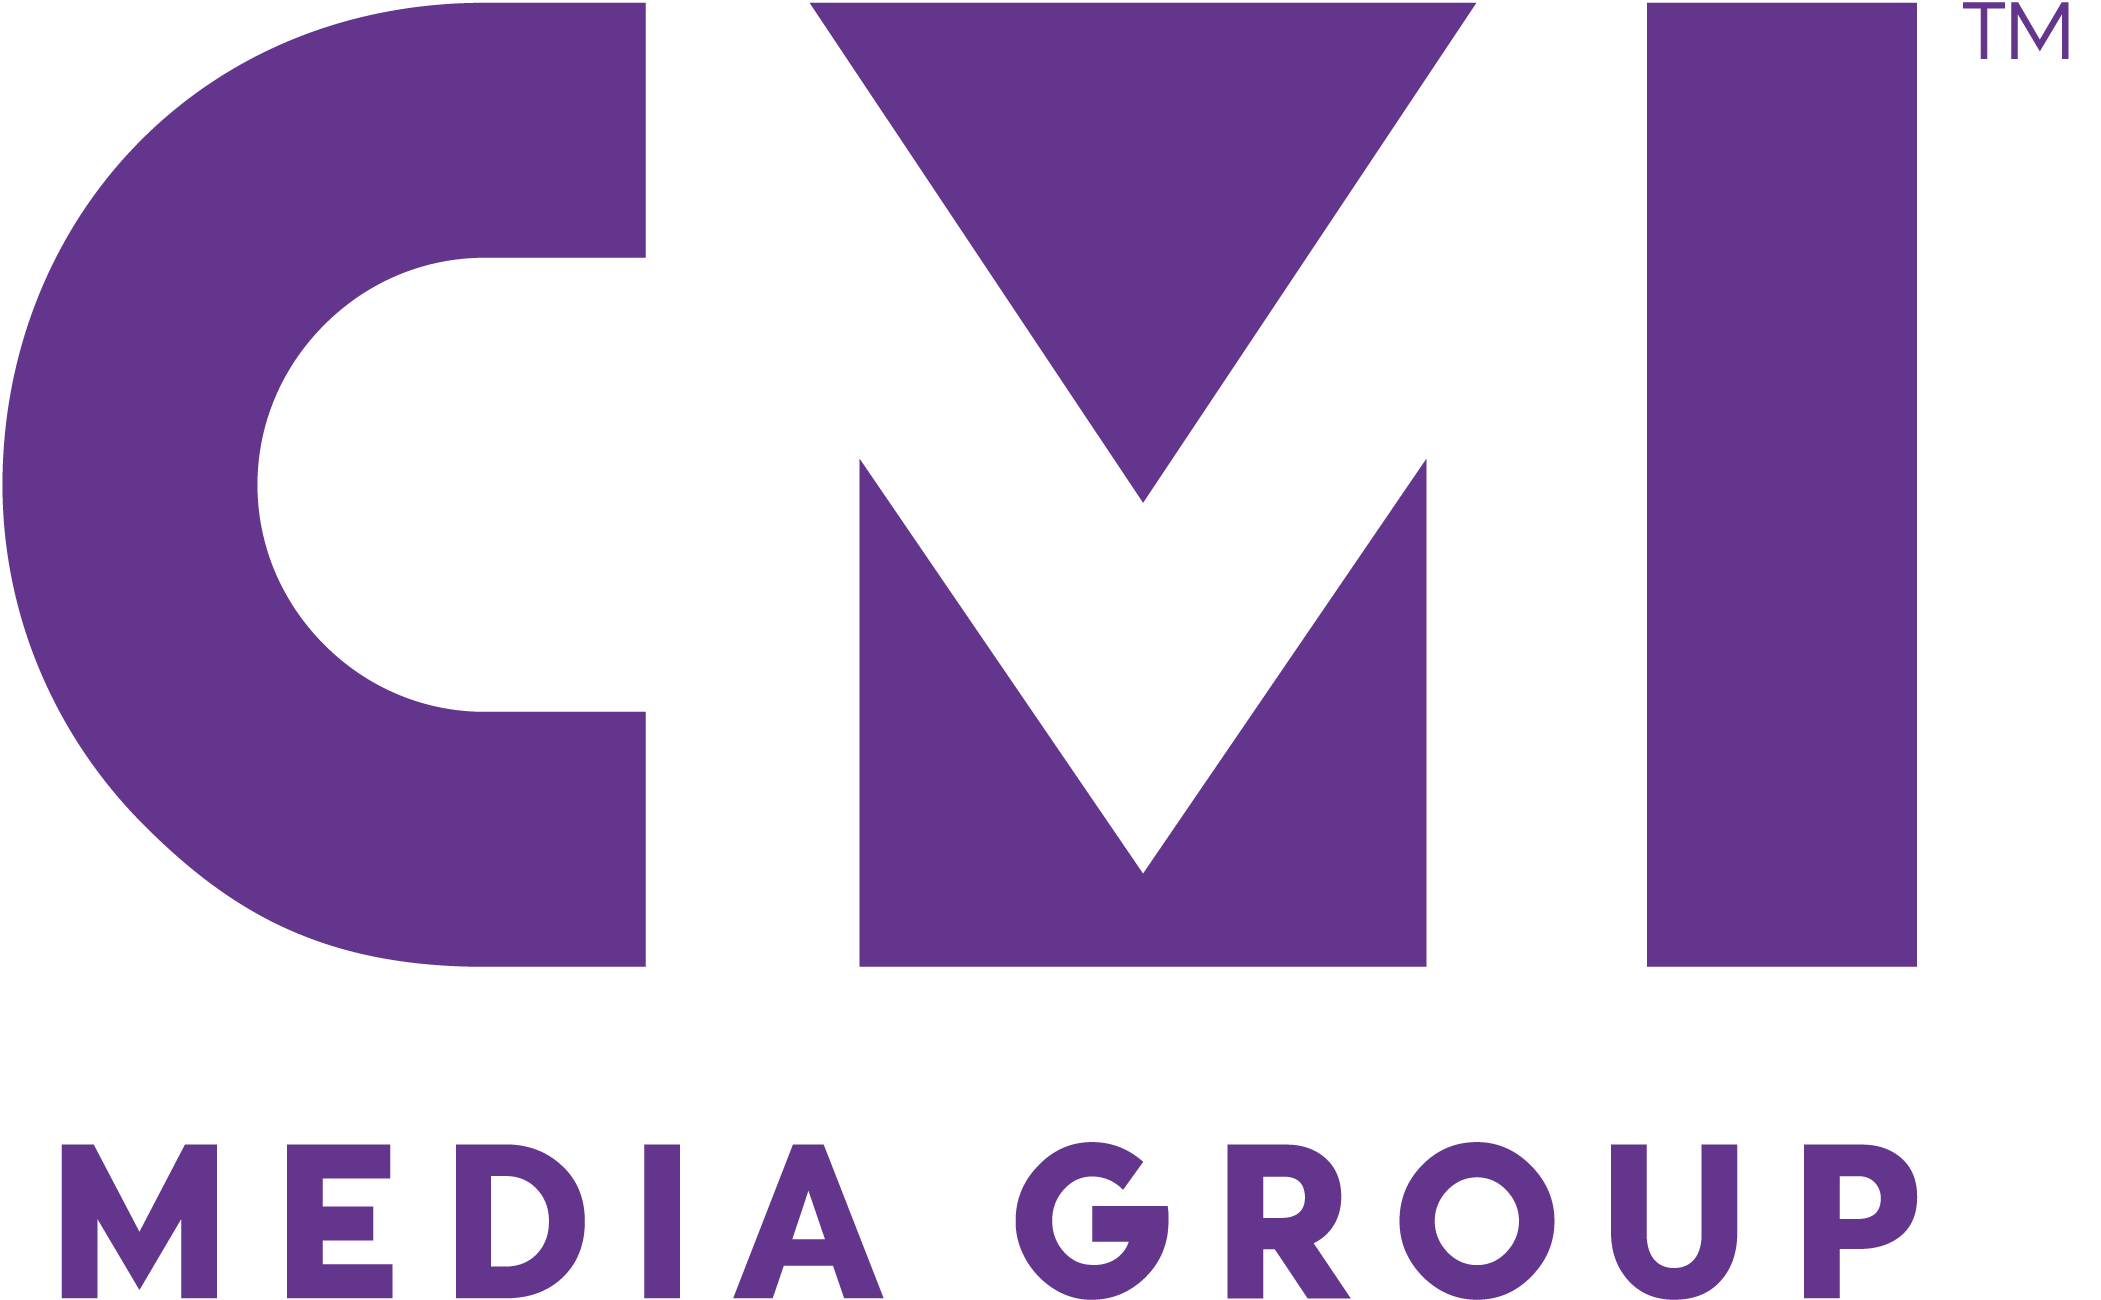 CMI Media Group and Compas